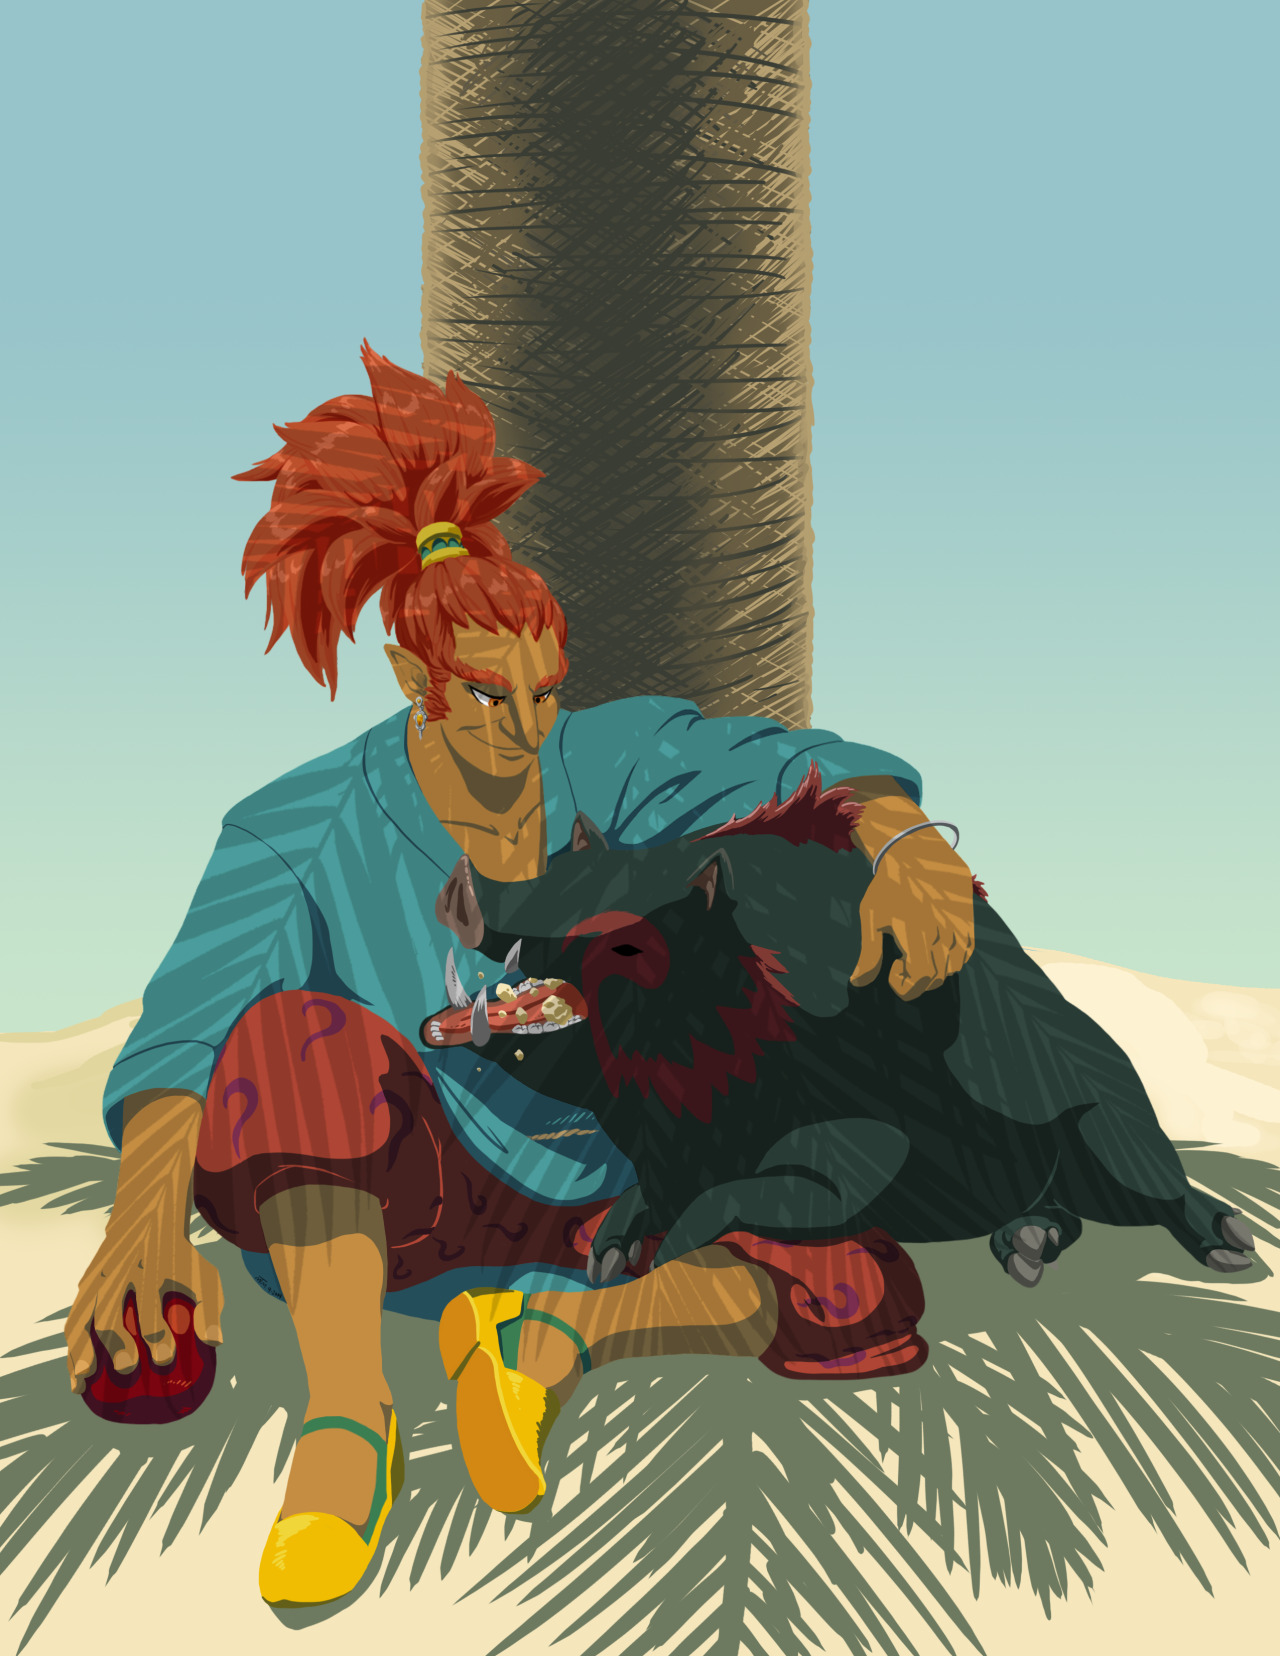 Now that it’s been released and sold, I can finally share my contributions to @ganzine2020! I’m very proud of that window in particular, and I learned a lot while working on the pic of him and his boar buddy. #digital art#digital color#digital shaded#loz#ganondorf #ocarina of time #windwaker#twilight princess #legend of zelda #fan art